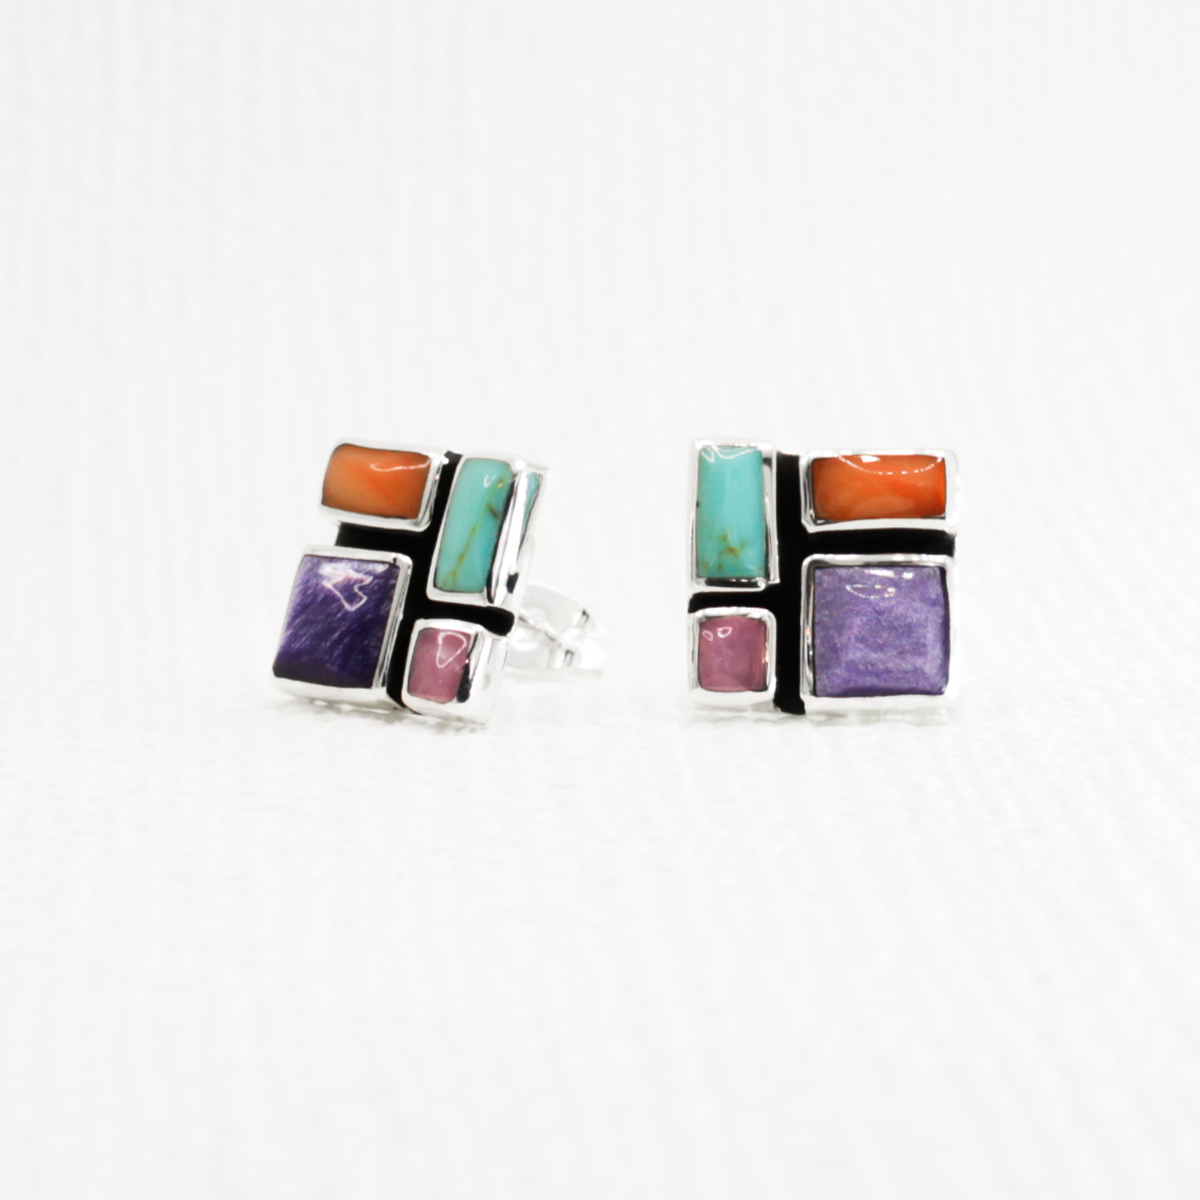 Adorn your ears and add a vibrant pop of color with Sleveen - Square With Multi-Coloured Mosaic Resin Silver Earrings - Stud! These dazzling earrings measure 12mm in width and 12mm in length, and 3mm depth - crafted with lustrous .925 sterling silver and colourful resins, reminiscent of the picturesque houses of Kinsale. Secure with a sterling silver friction post.